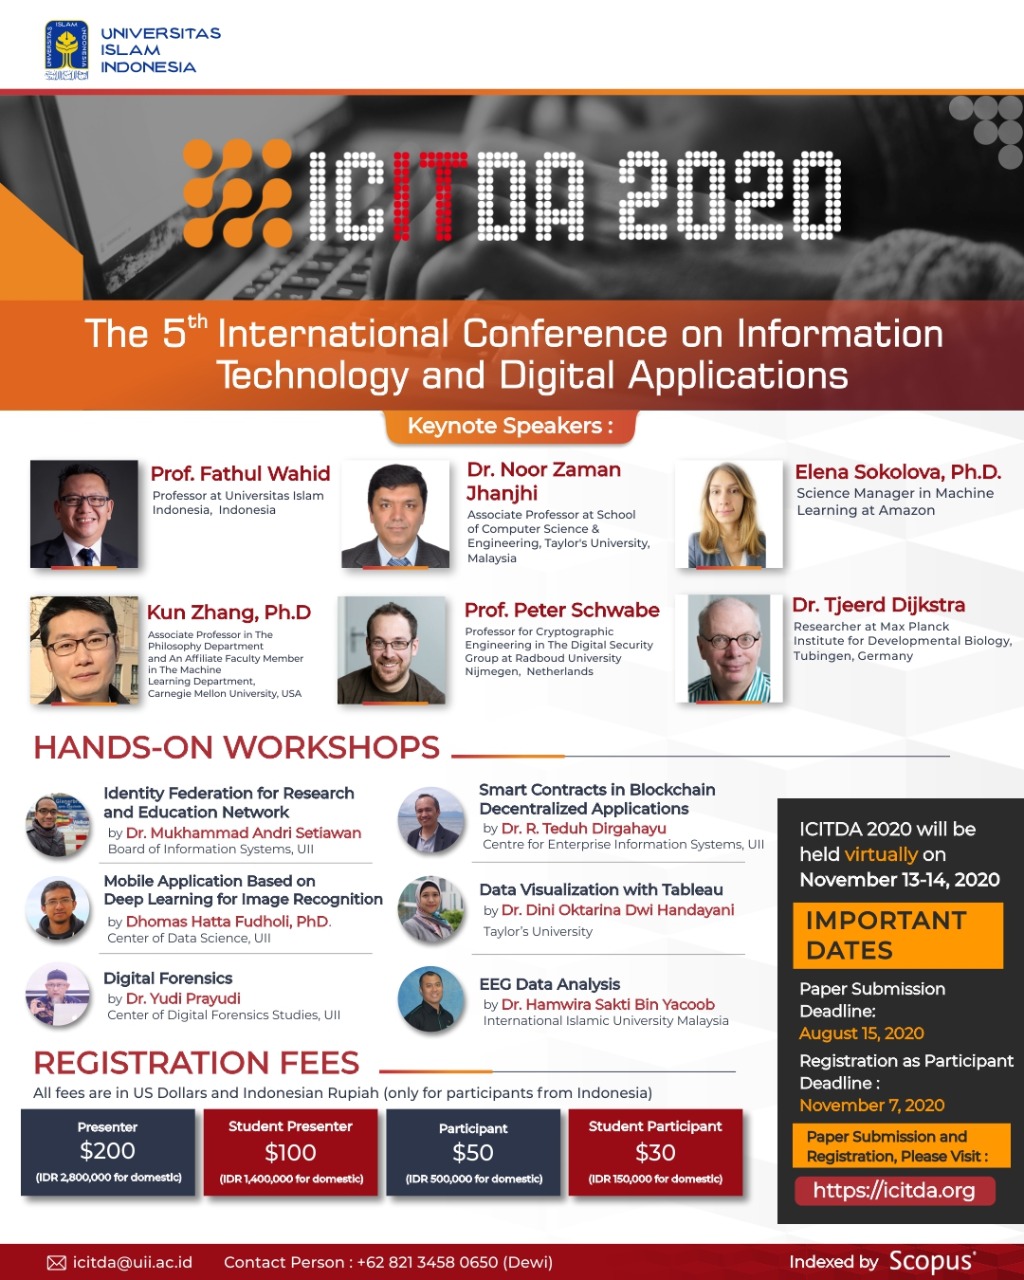 ICITDA 2020 International Conference on Information Technology and Digital Applications